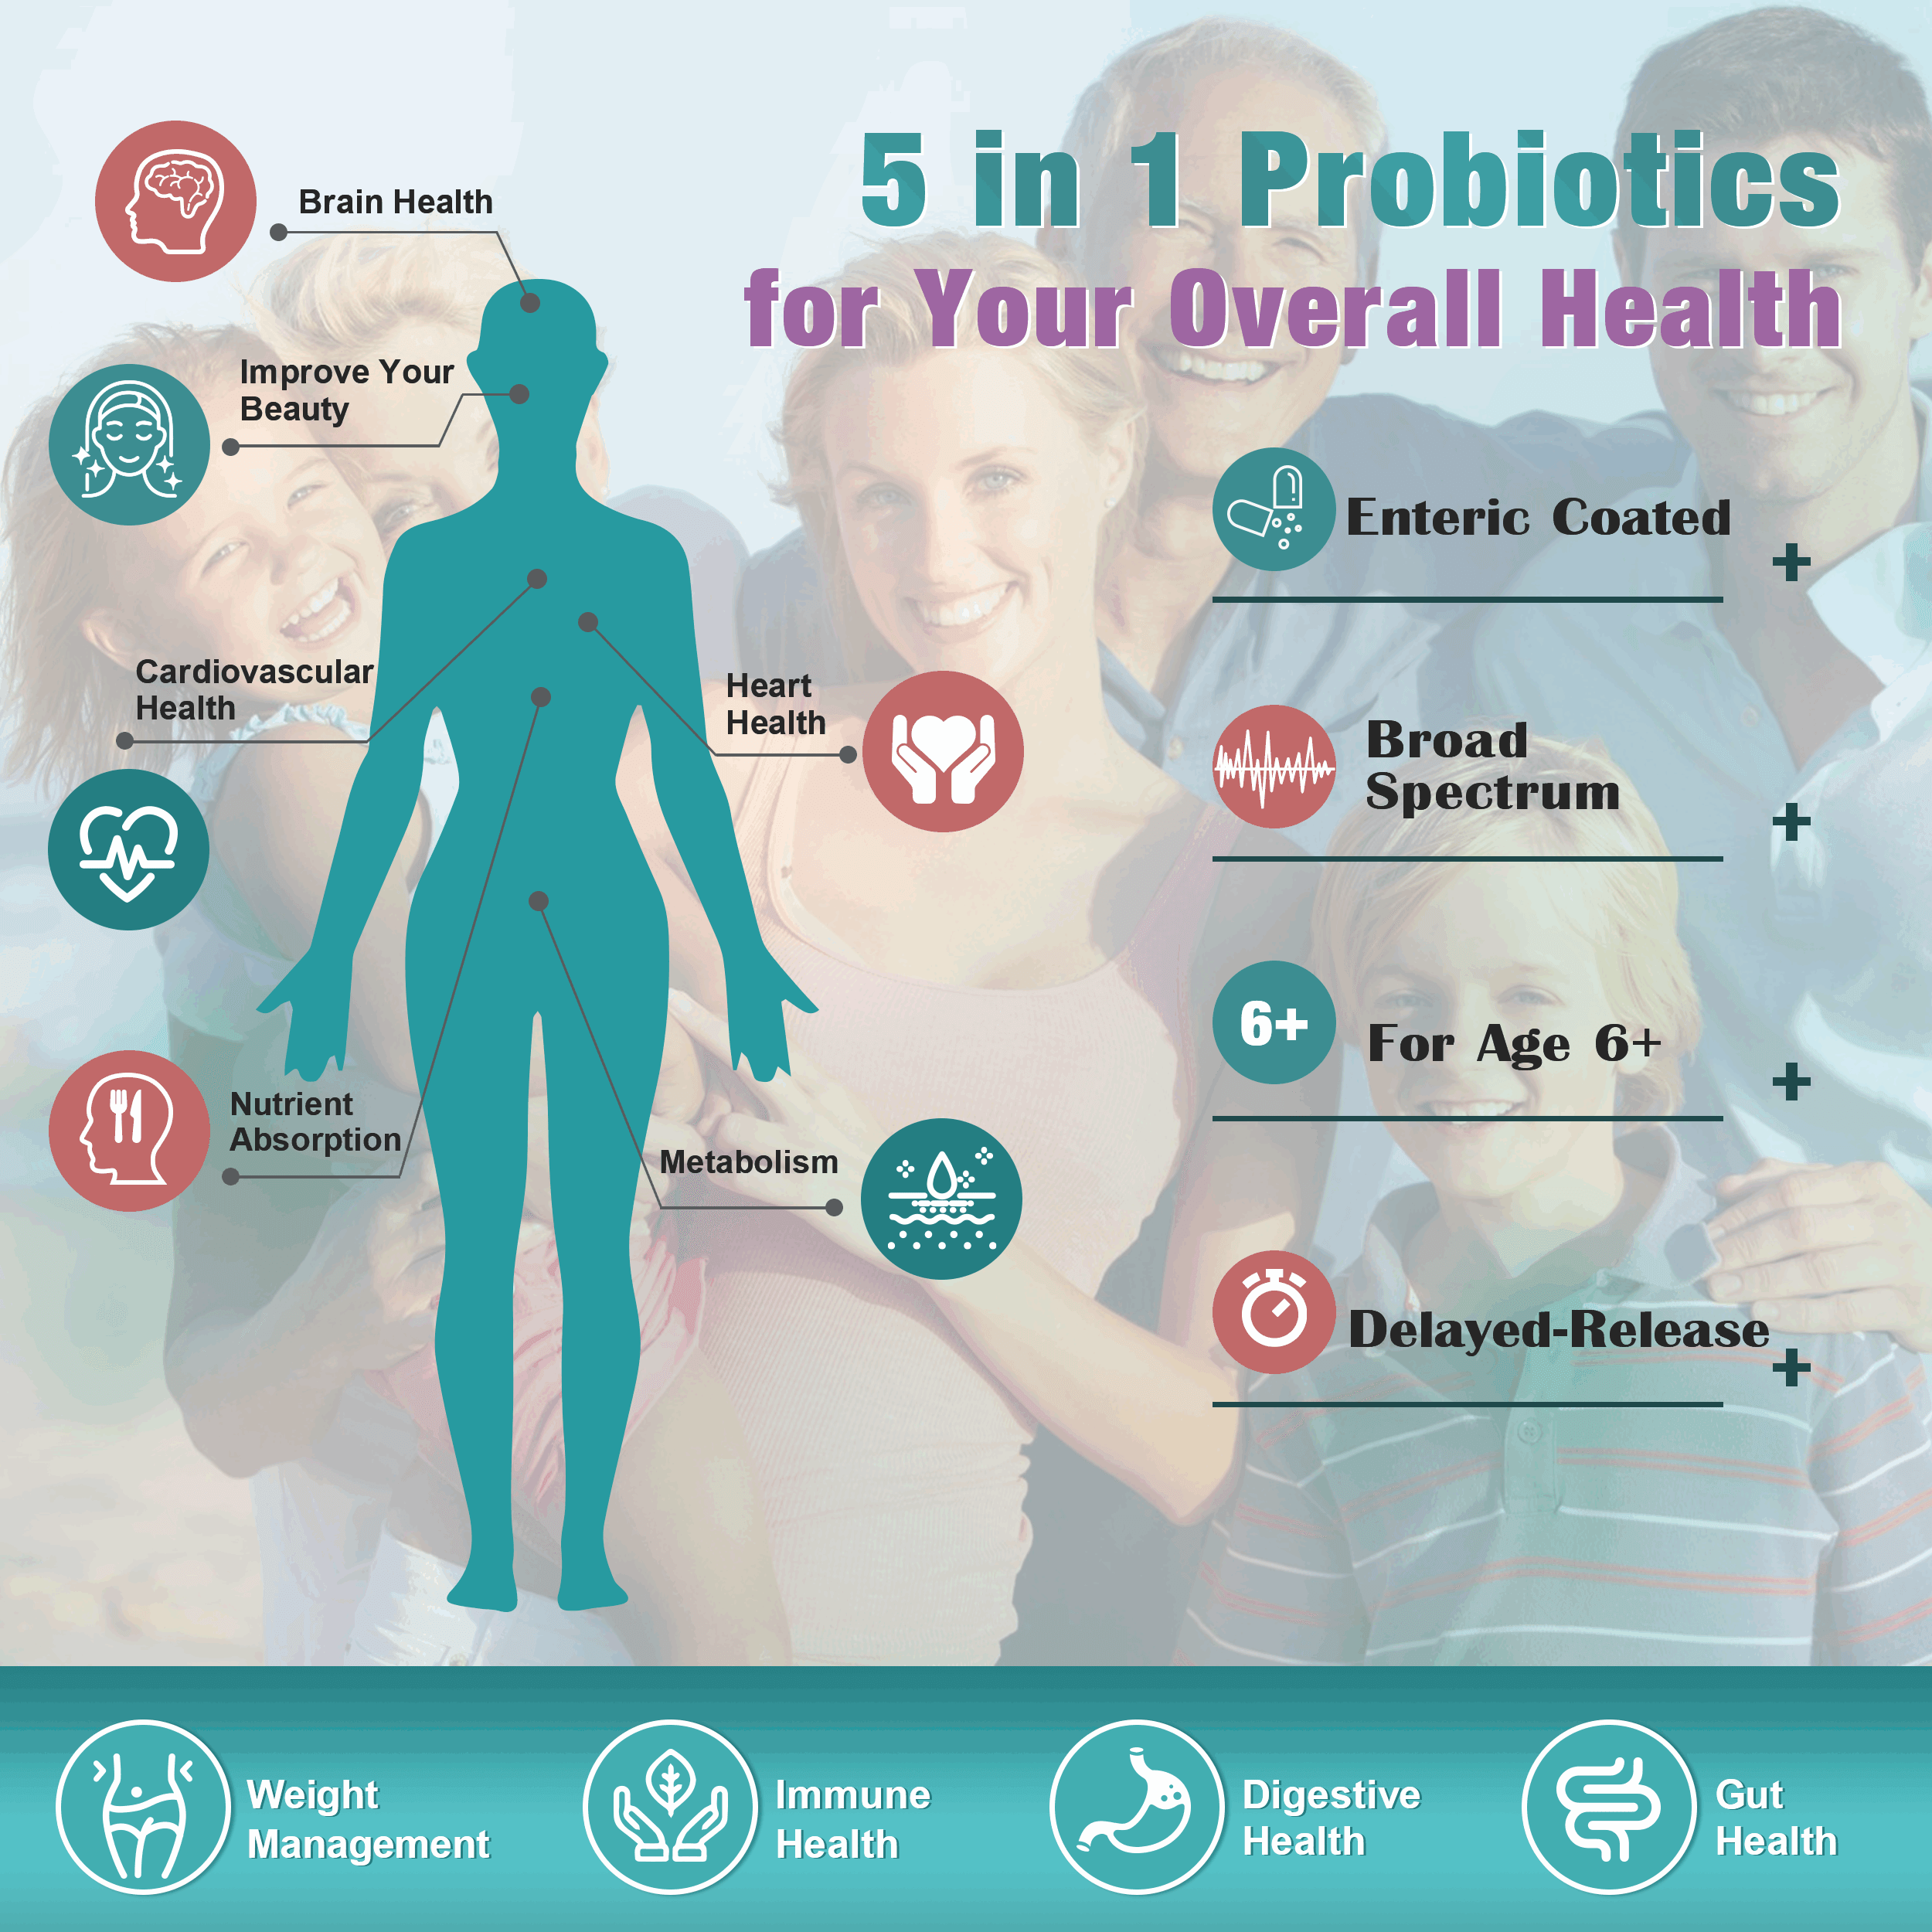 5 in 1 Probiotics For Your Overall Health